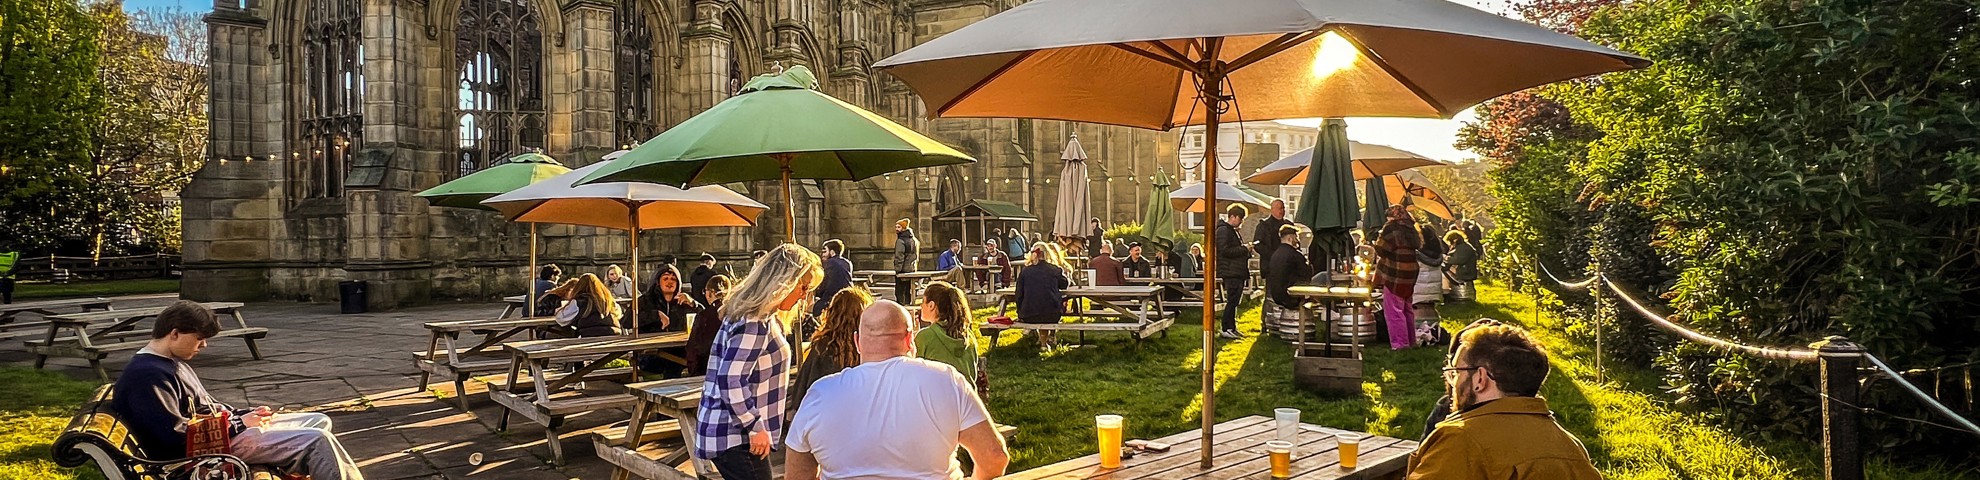 Outdoor dining on a sunny day with the bombed out church in the background.